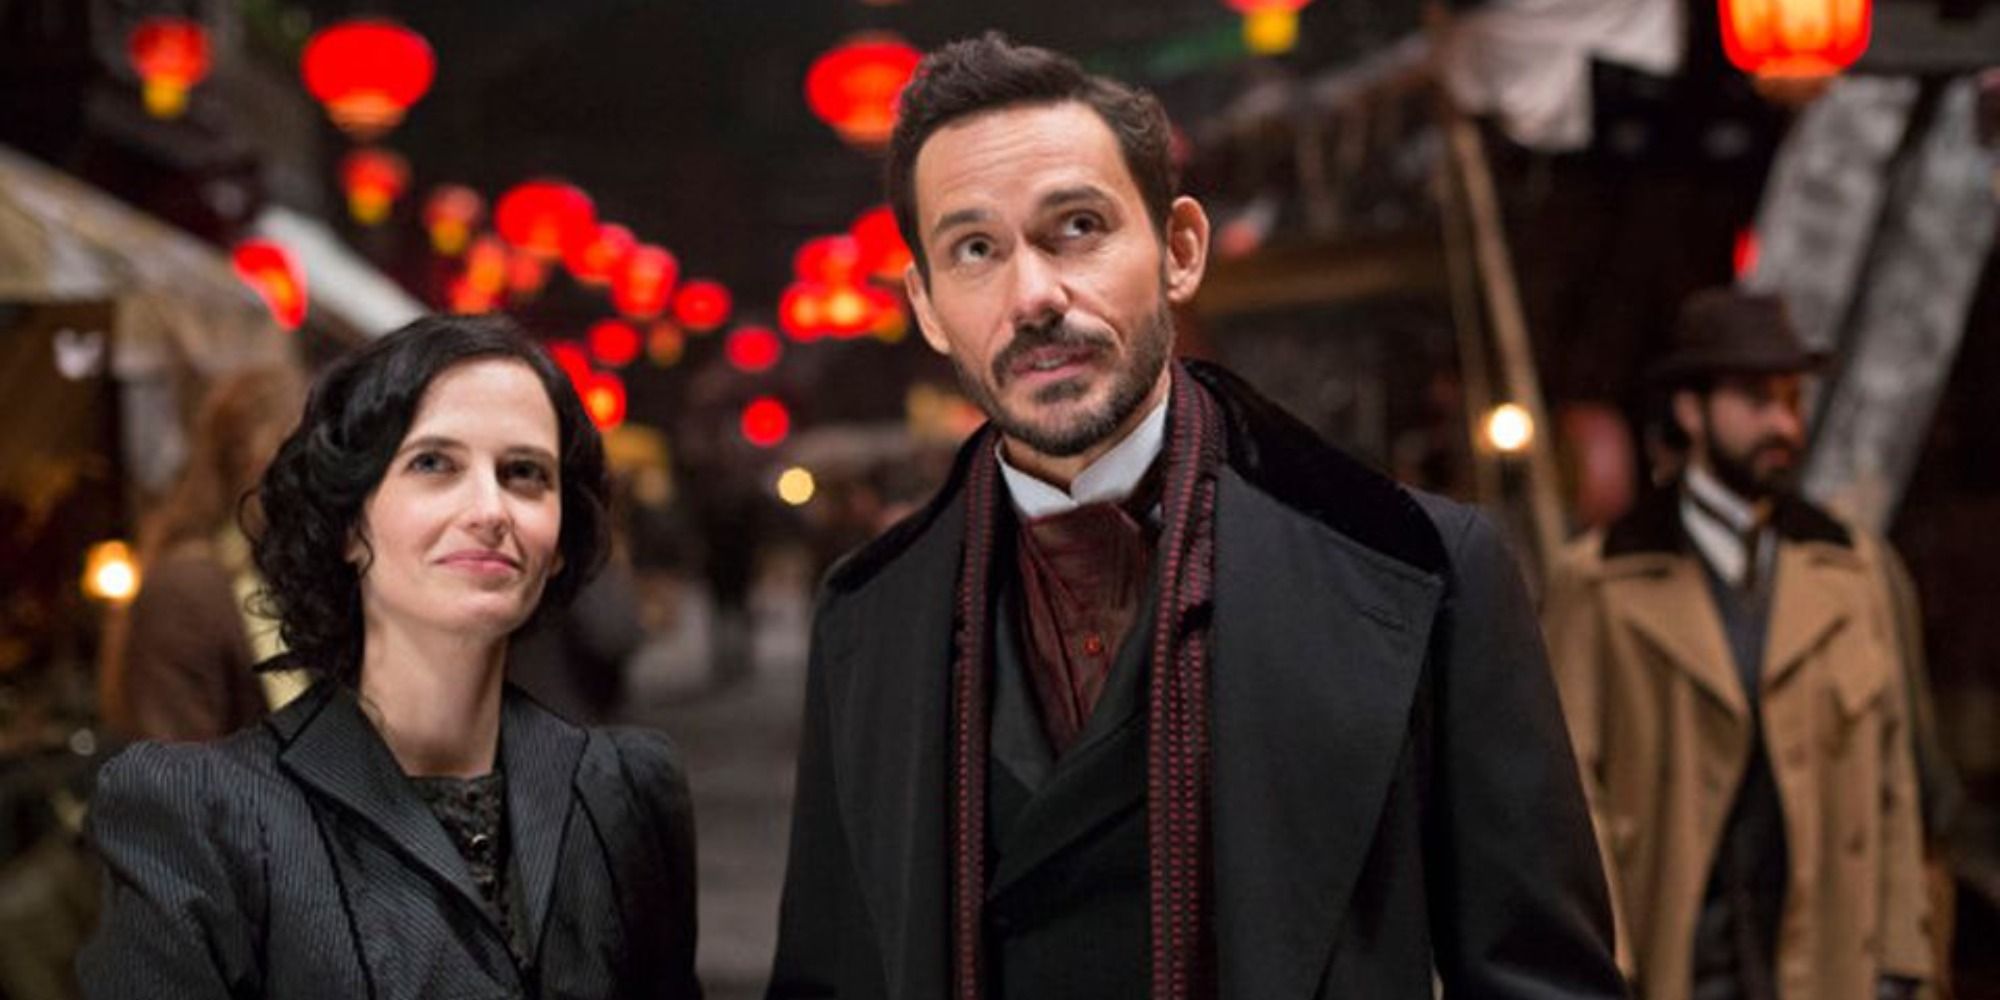 An image of Vanessa and Dracula standing together in a market in Penny Dreadful